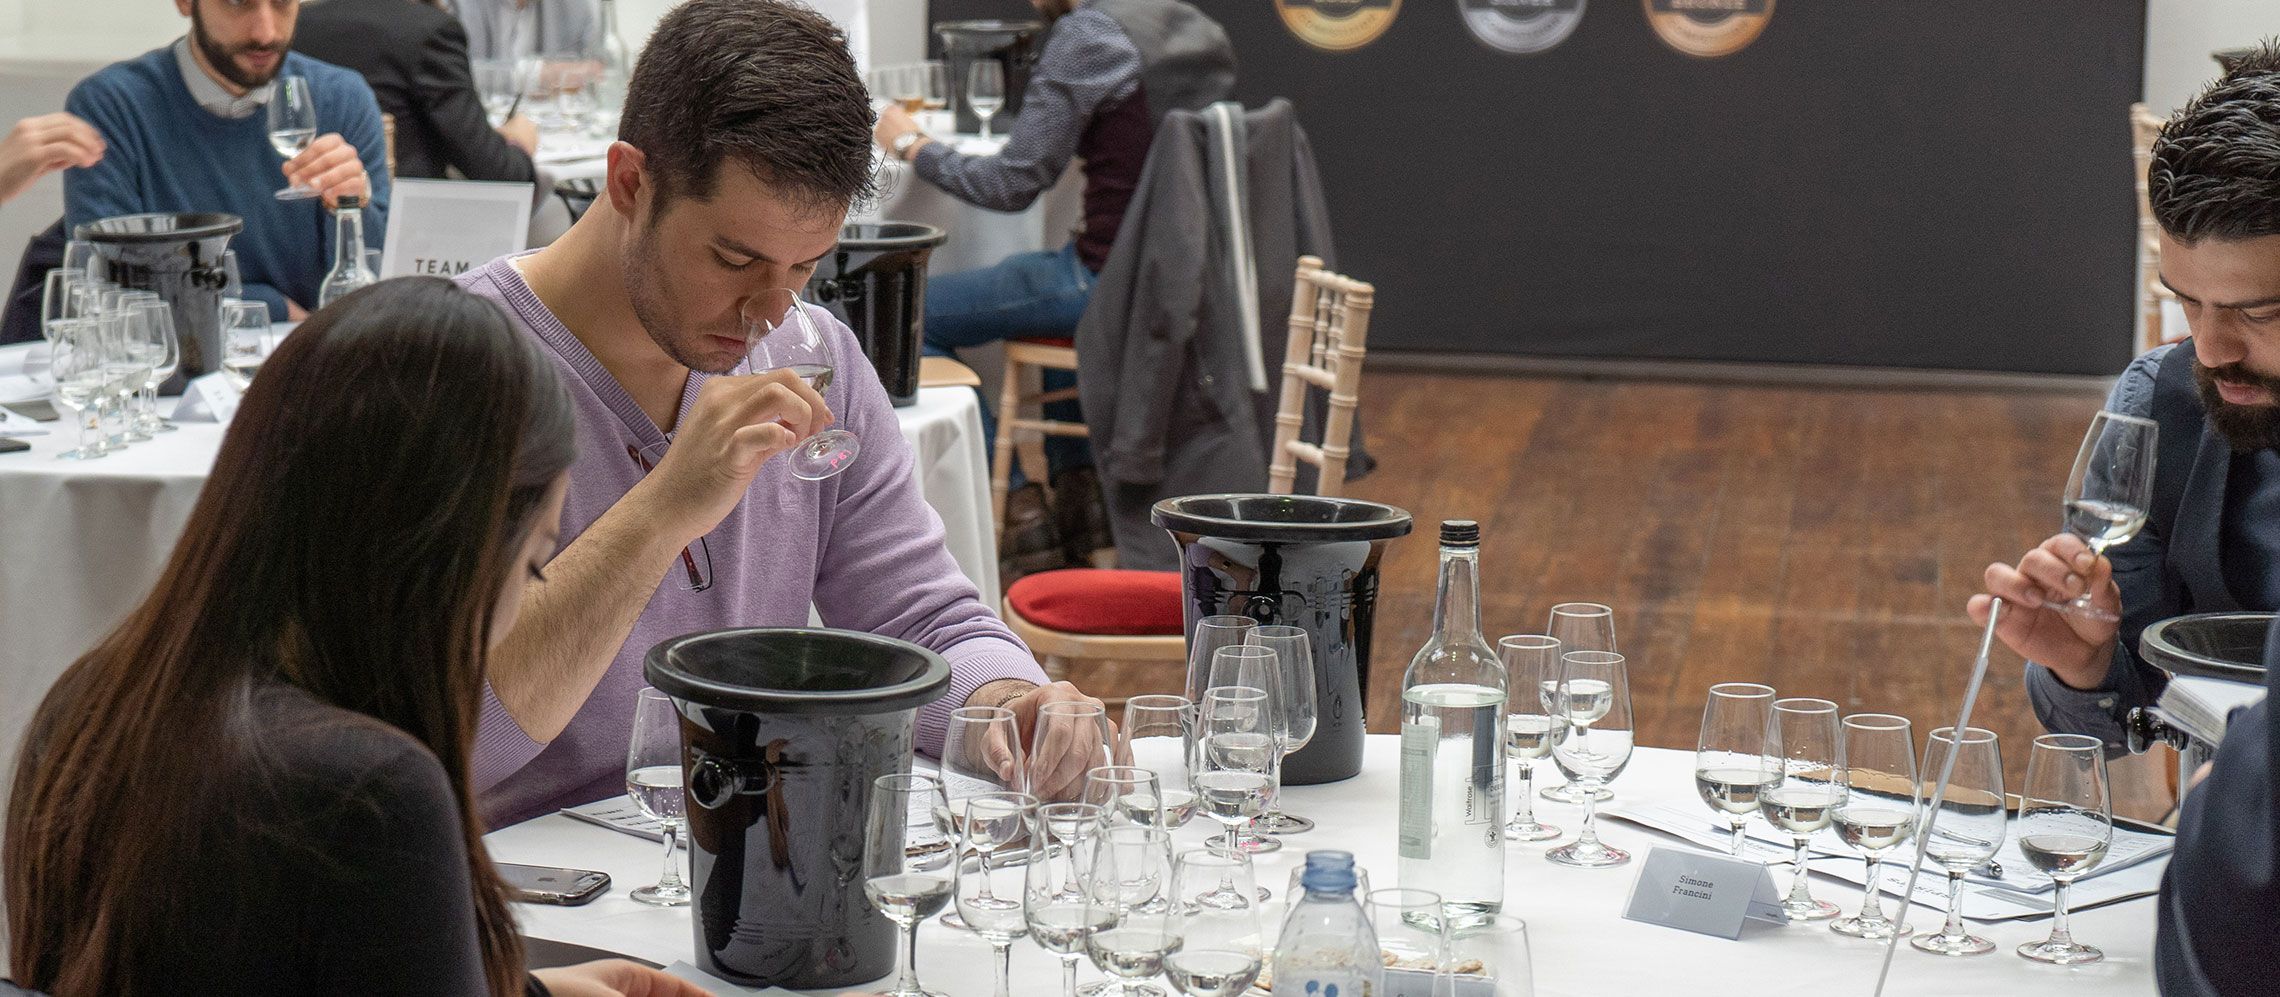 Photo for: London Spirits Competition - An Update For Distilleries & Brands